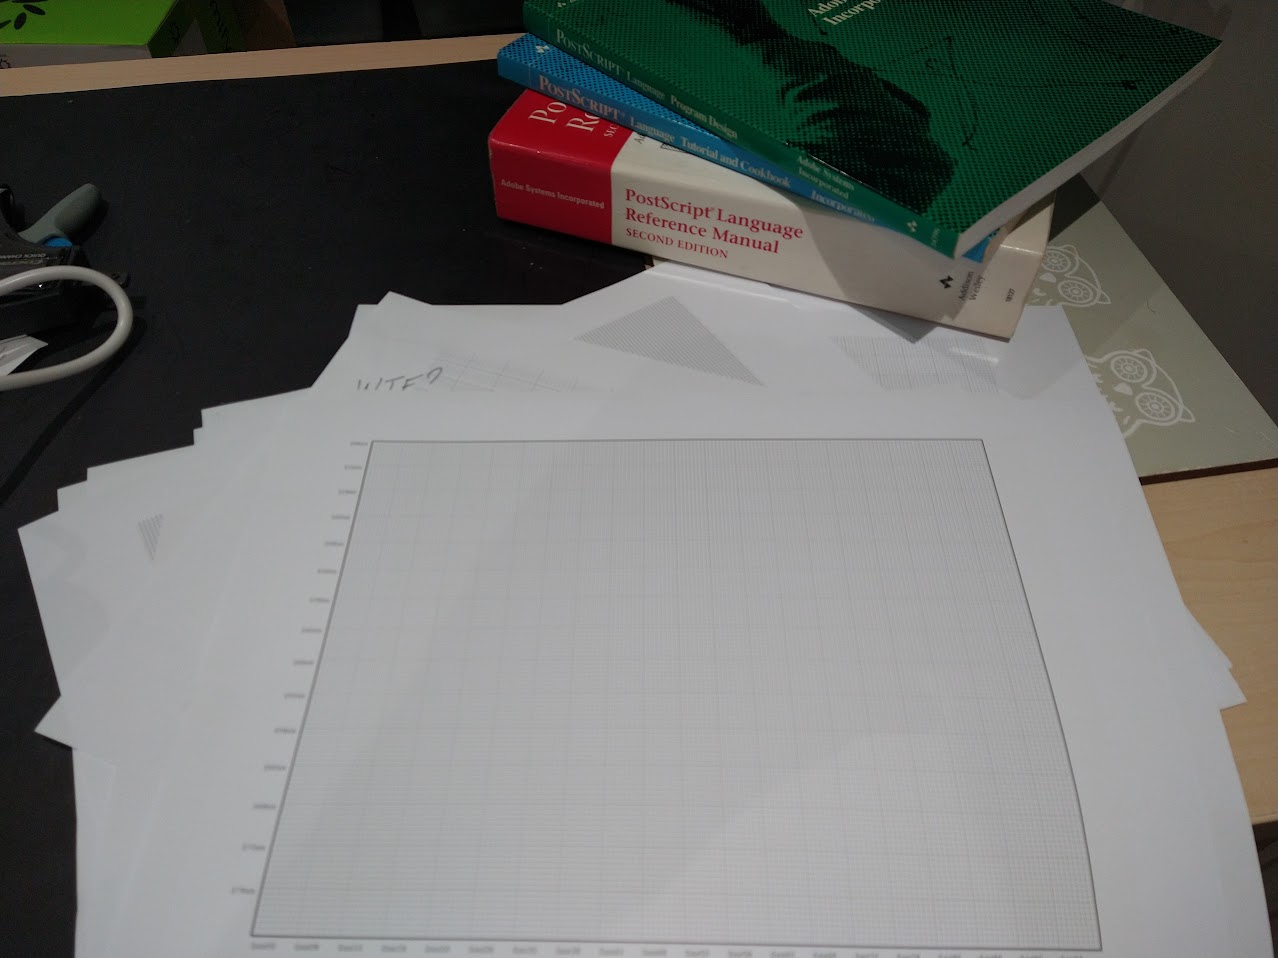 Gigatron graph paper on a pile of failed attempts. PostScript manuals in the background.